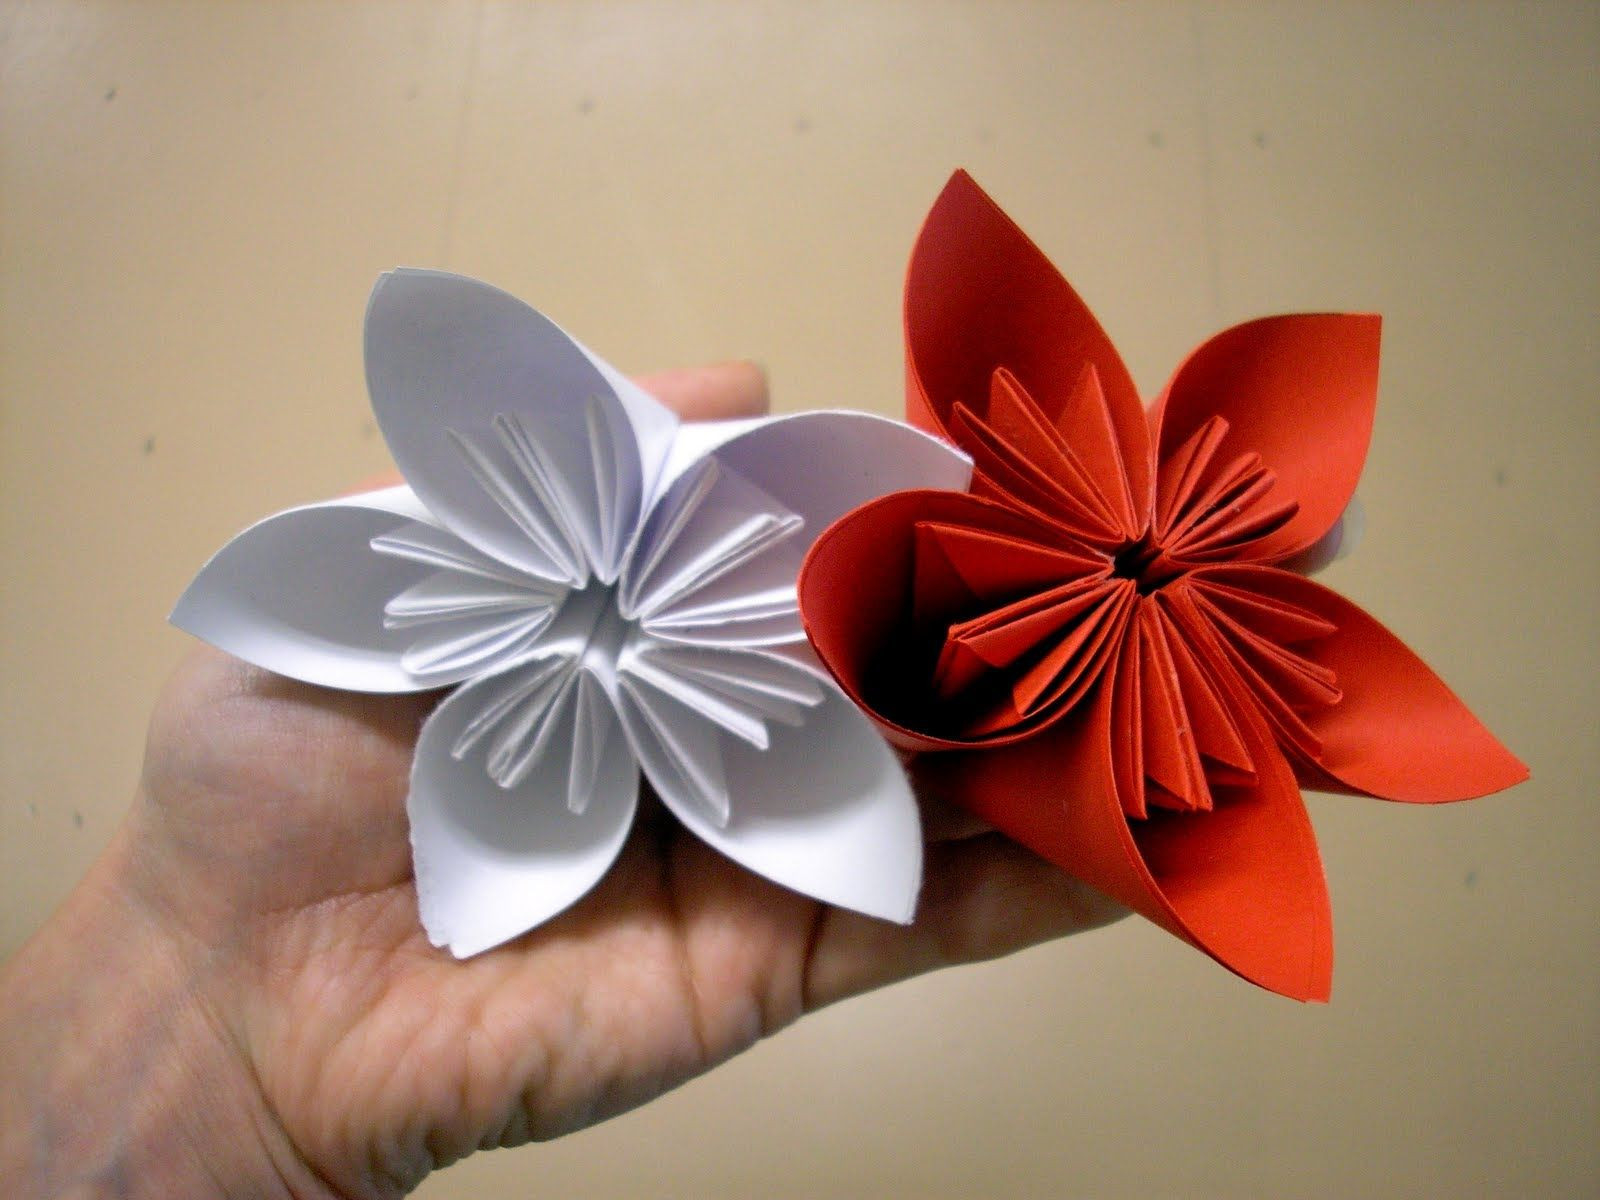 How To Make A Flower Origami Easy Fleur Origami Rose Lovely Easy Paper Flower Origami Flower Ideas For